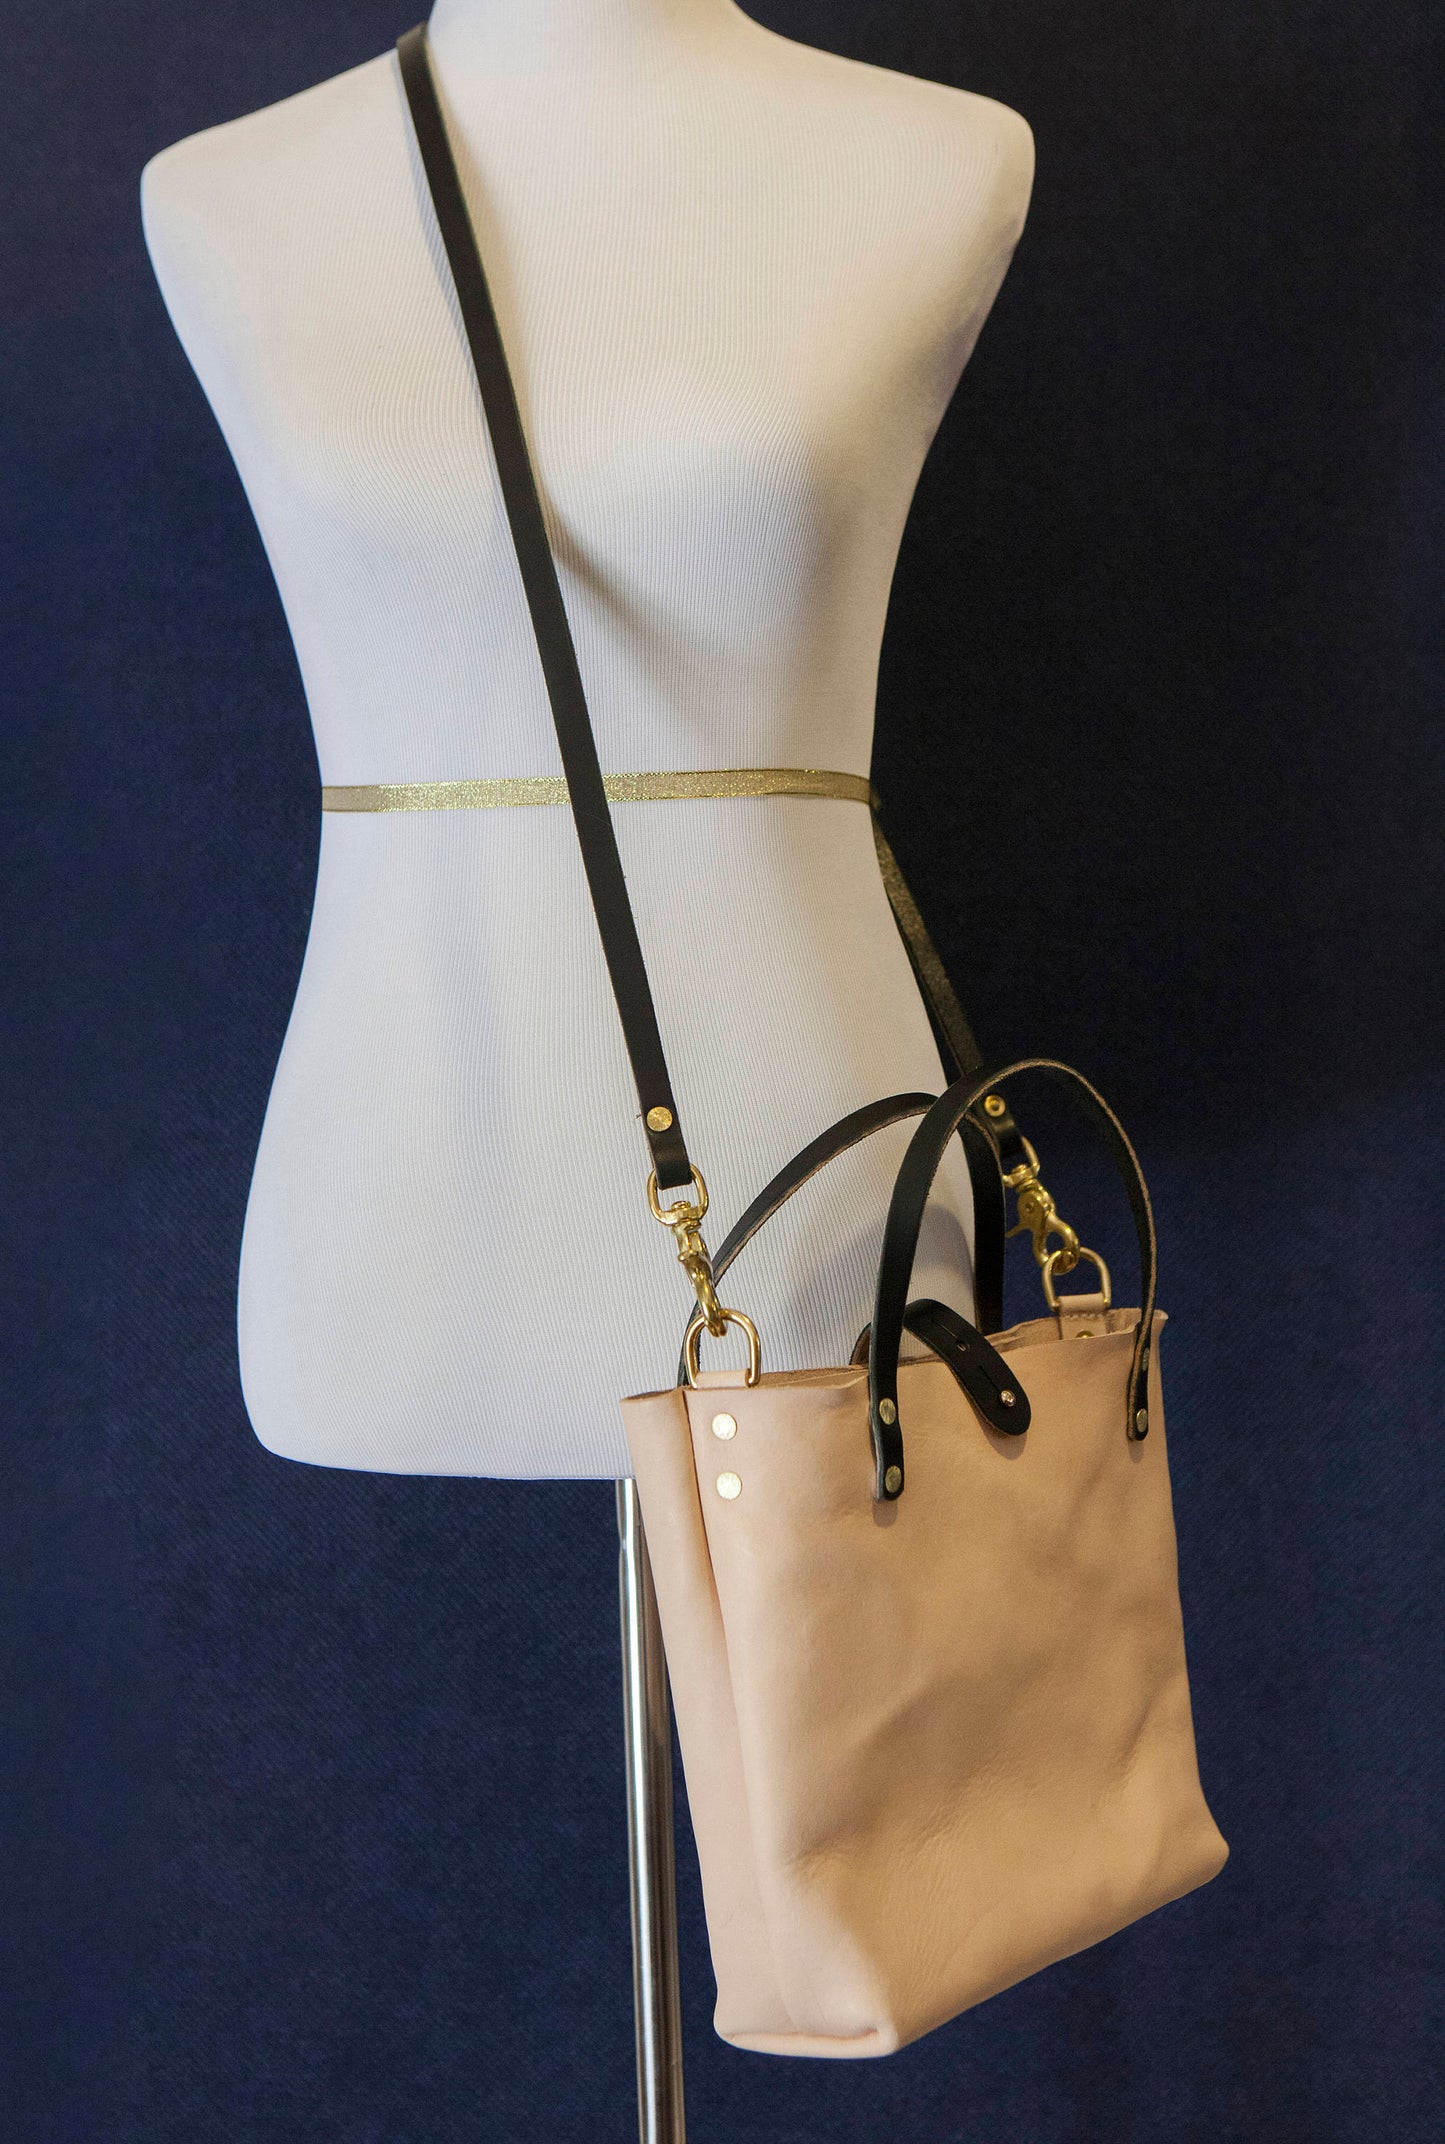 Made to Order - Natural Vegetable Tanned Handbag with Shoulder Strap, Black English Bridle Handles and Solid Brass Hardware Made in USA